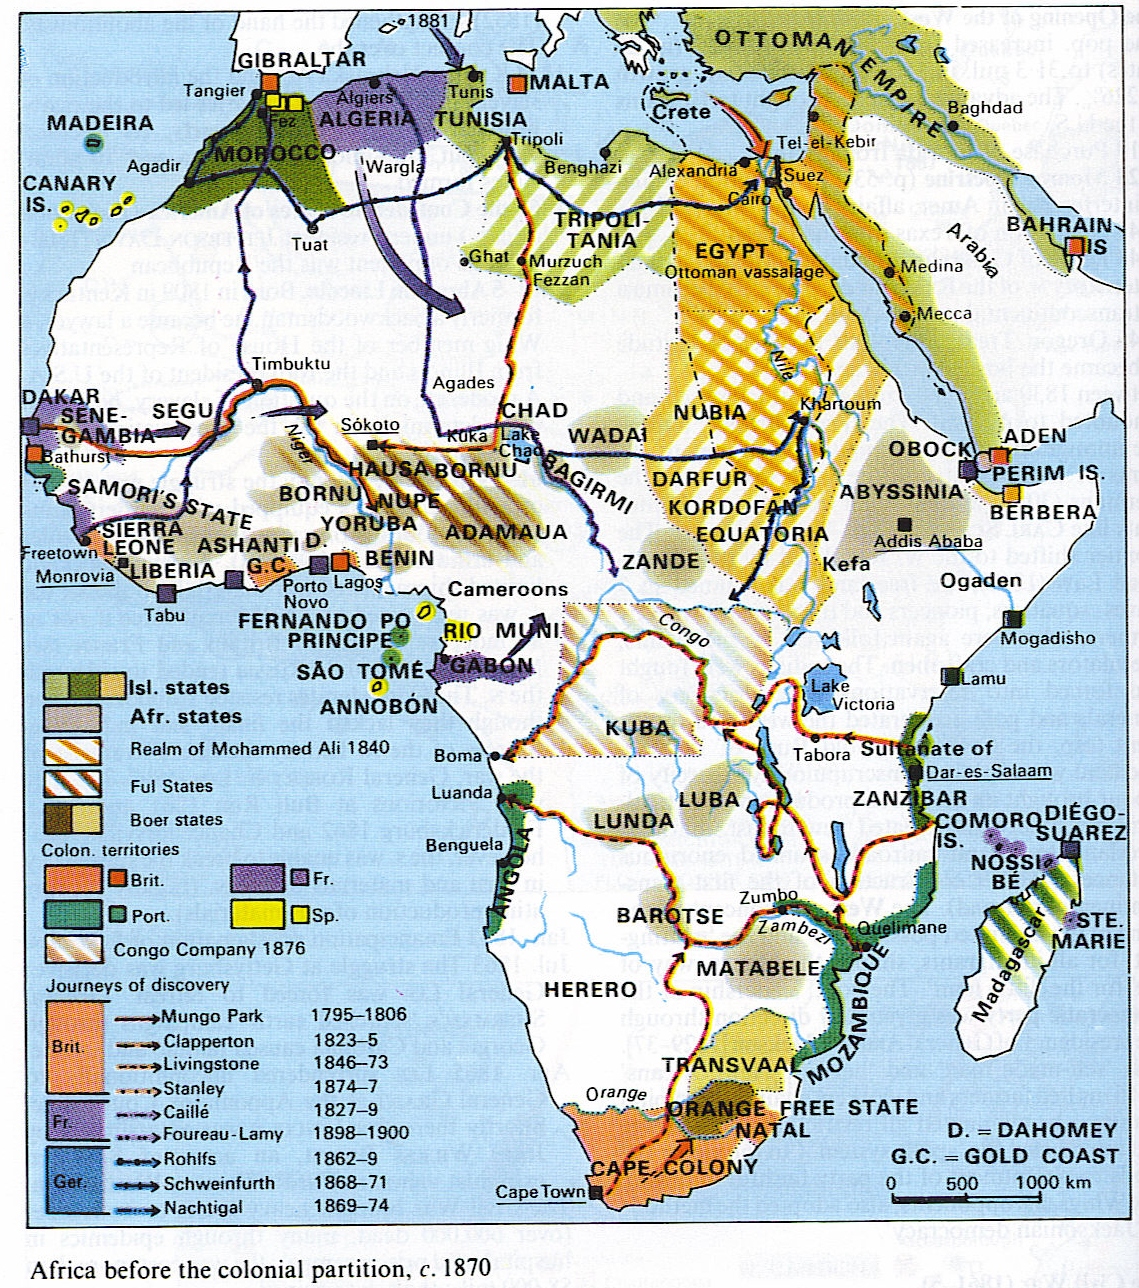 Africa-before-the-colonial-partition-c-1870.jpg